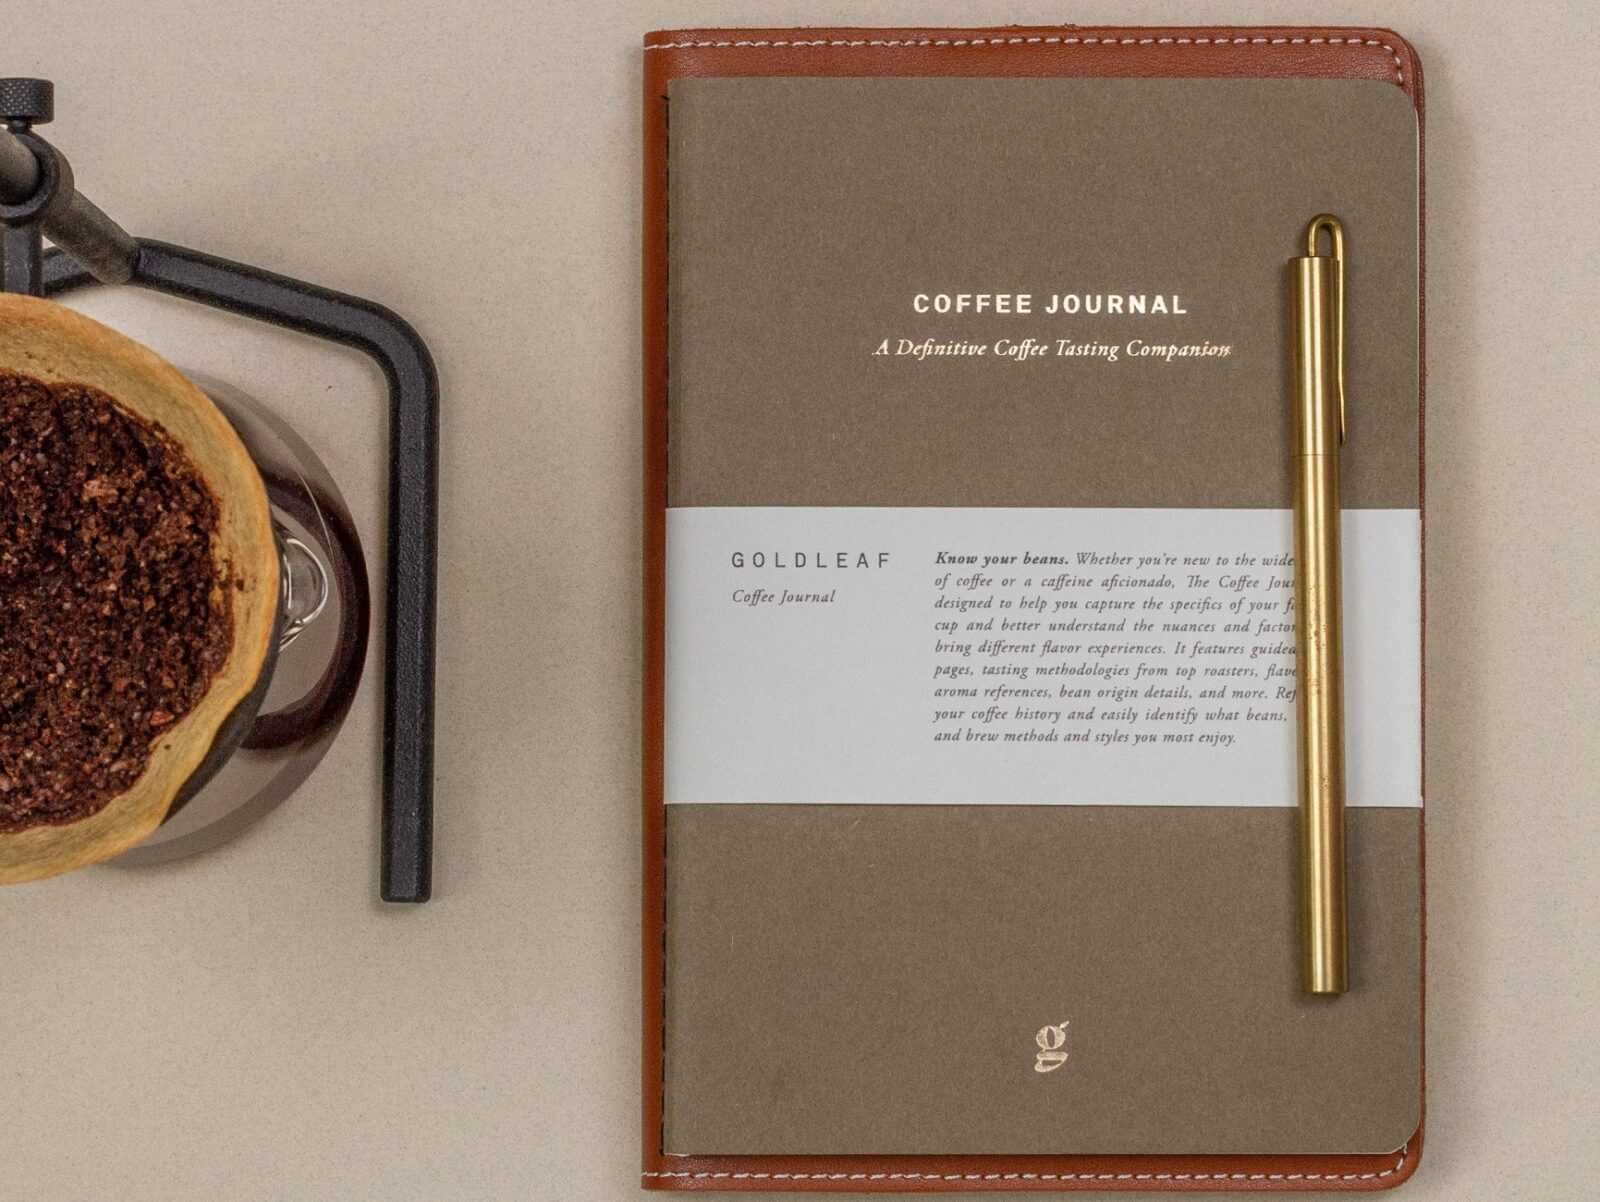 Goldleaf Invites To Discover The Ideal Cup Of Joe With The Coffee Journal